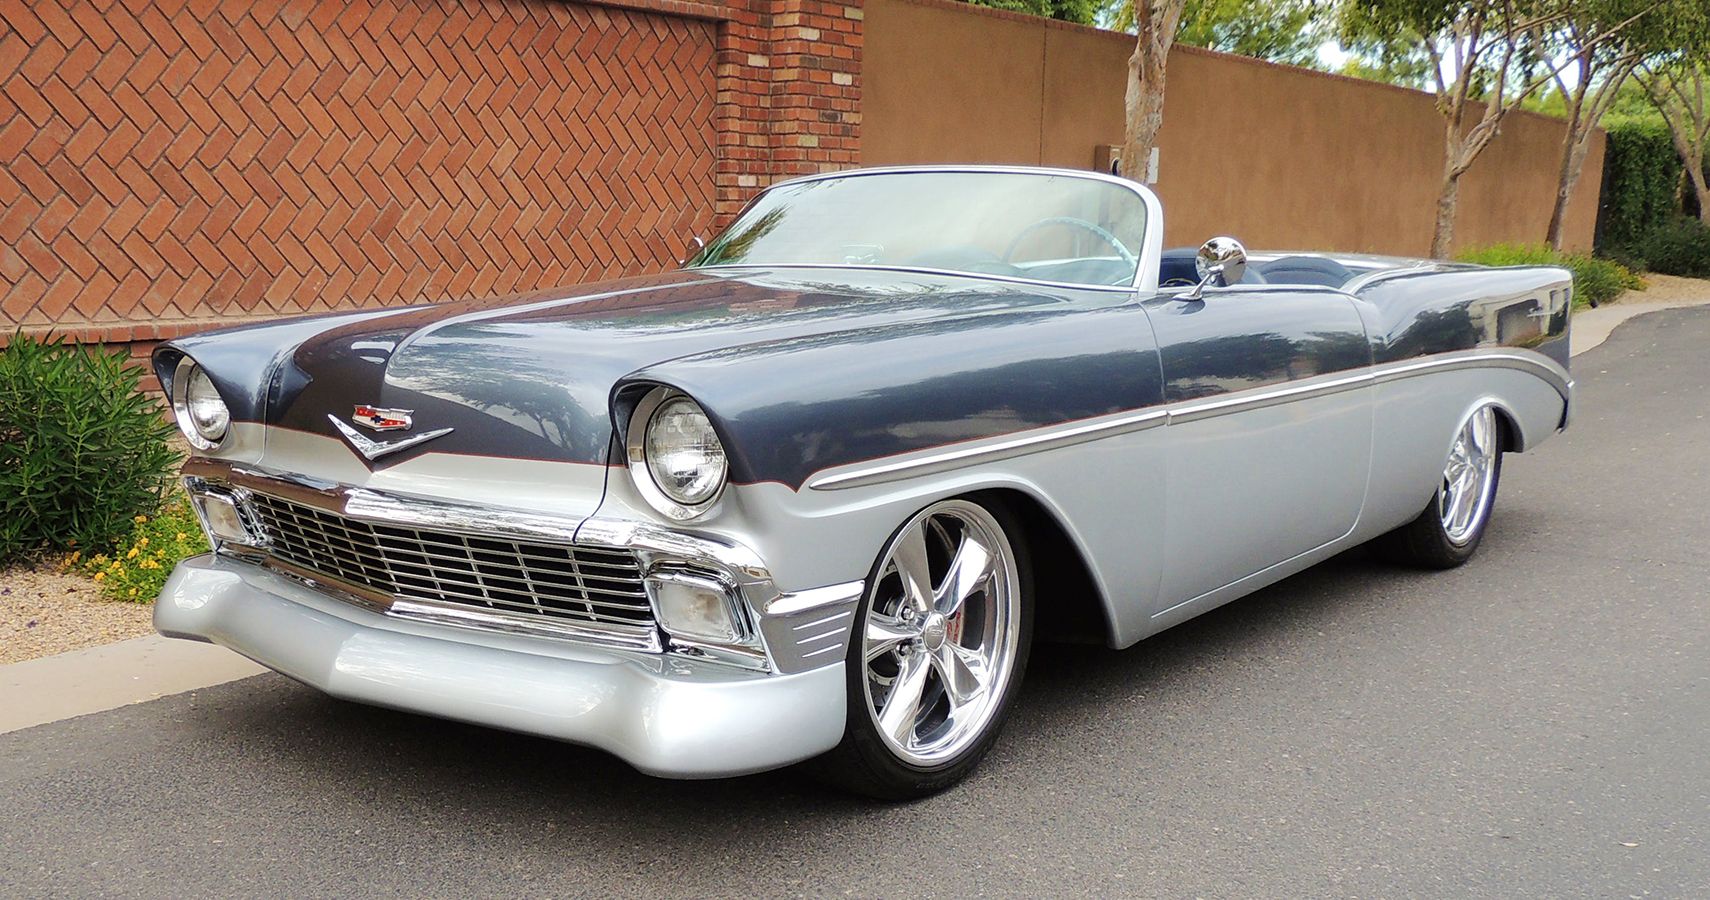 Christopher Titus’s '56 Chevy Bel Air